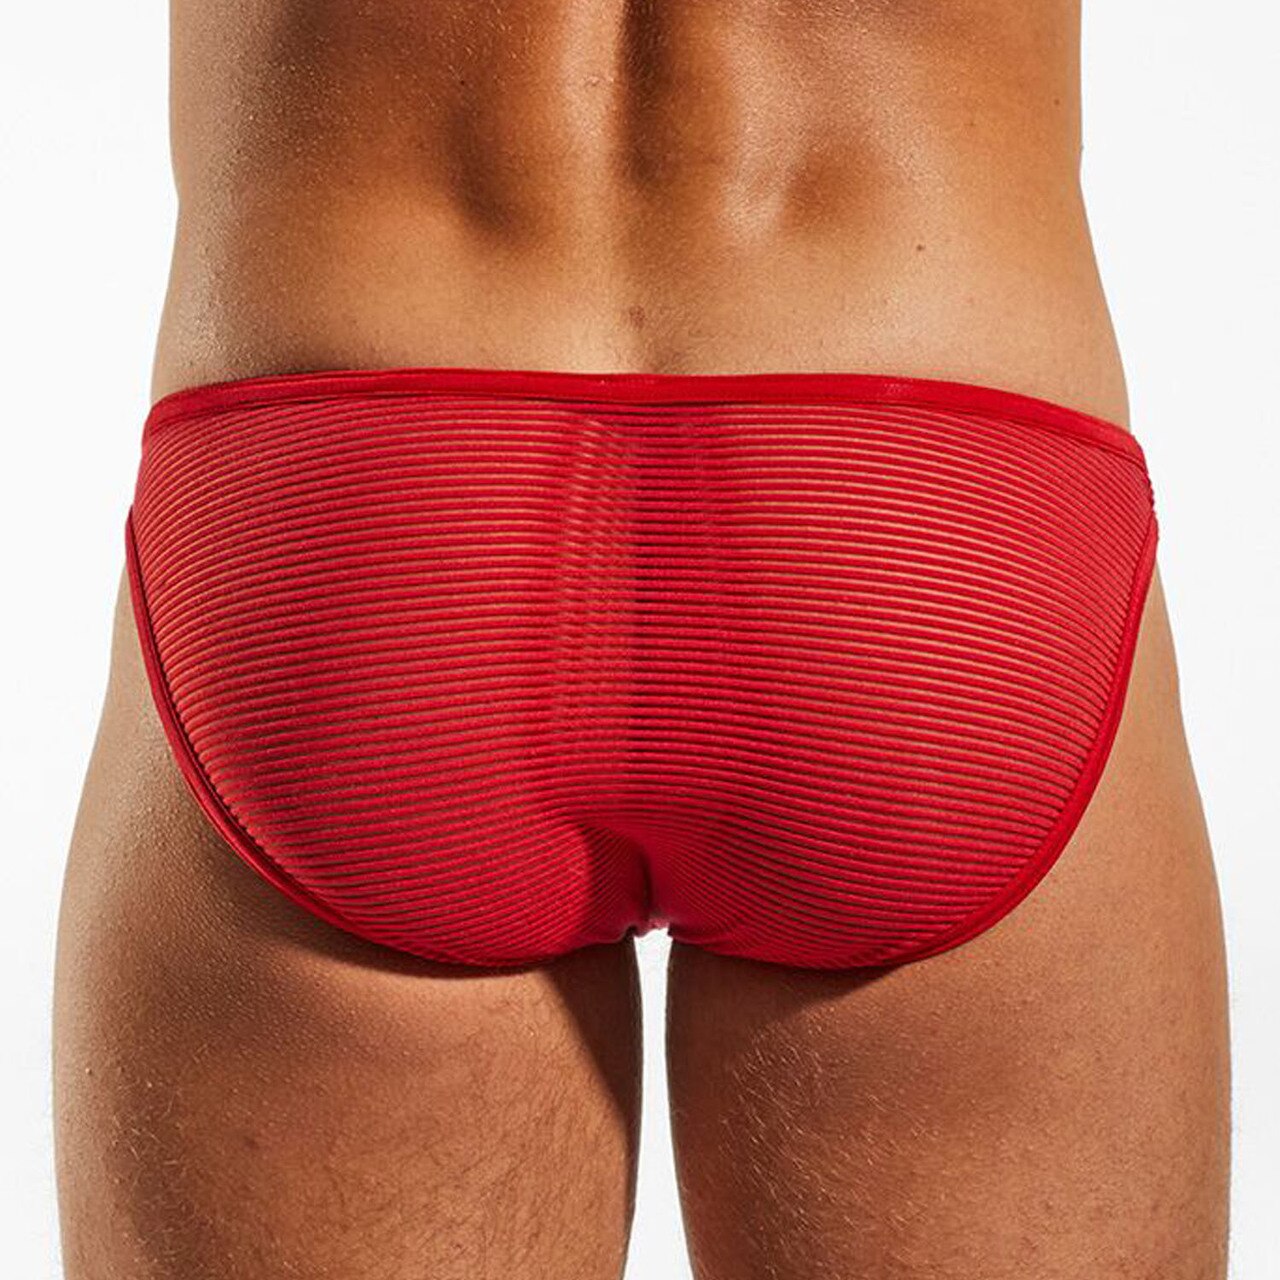 SALE - Mens Cocksox Sheer Multi Striped Brief Cupid Red